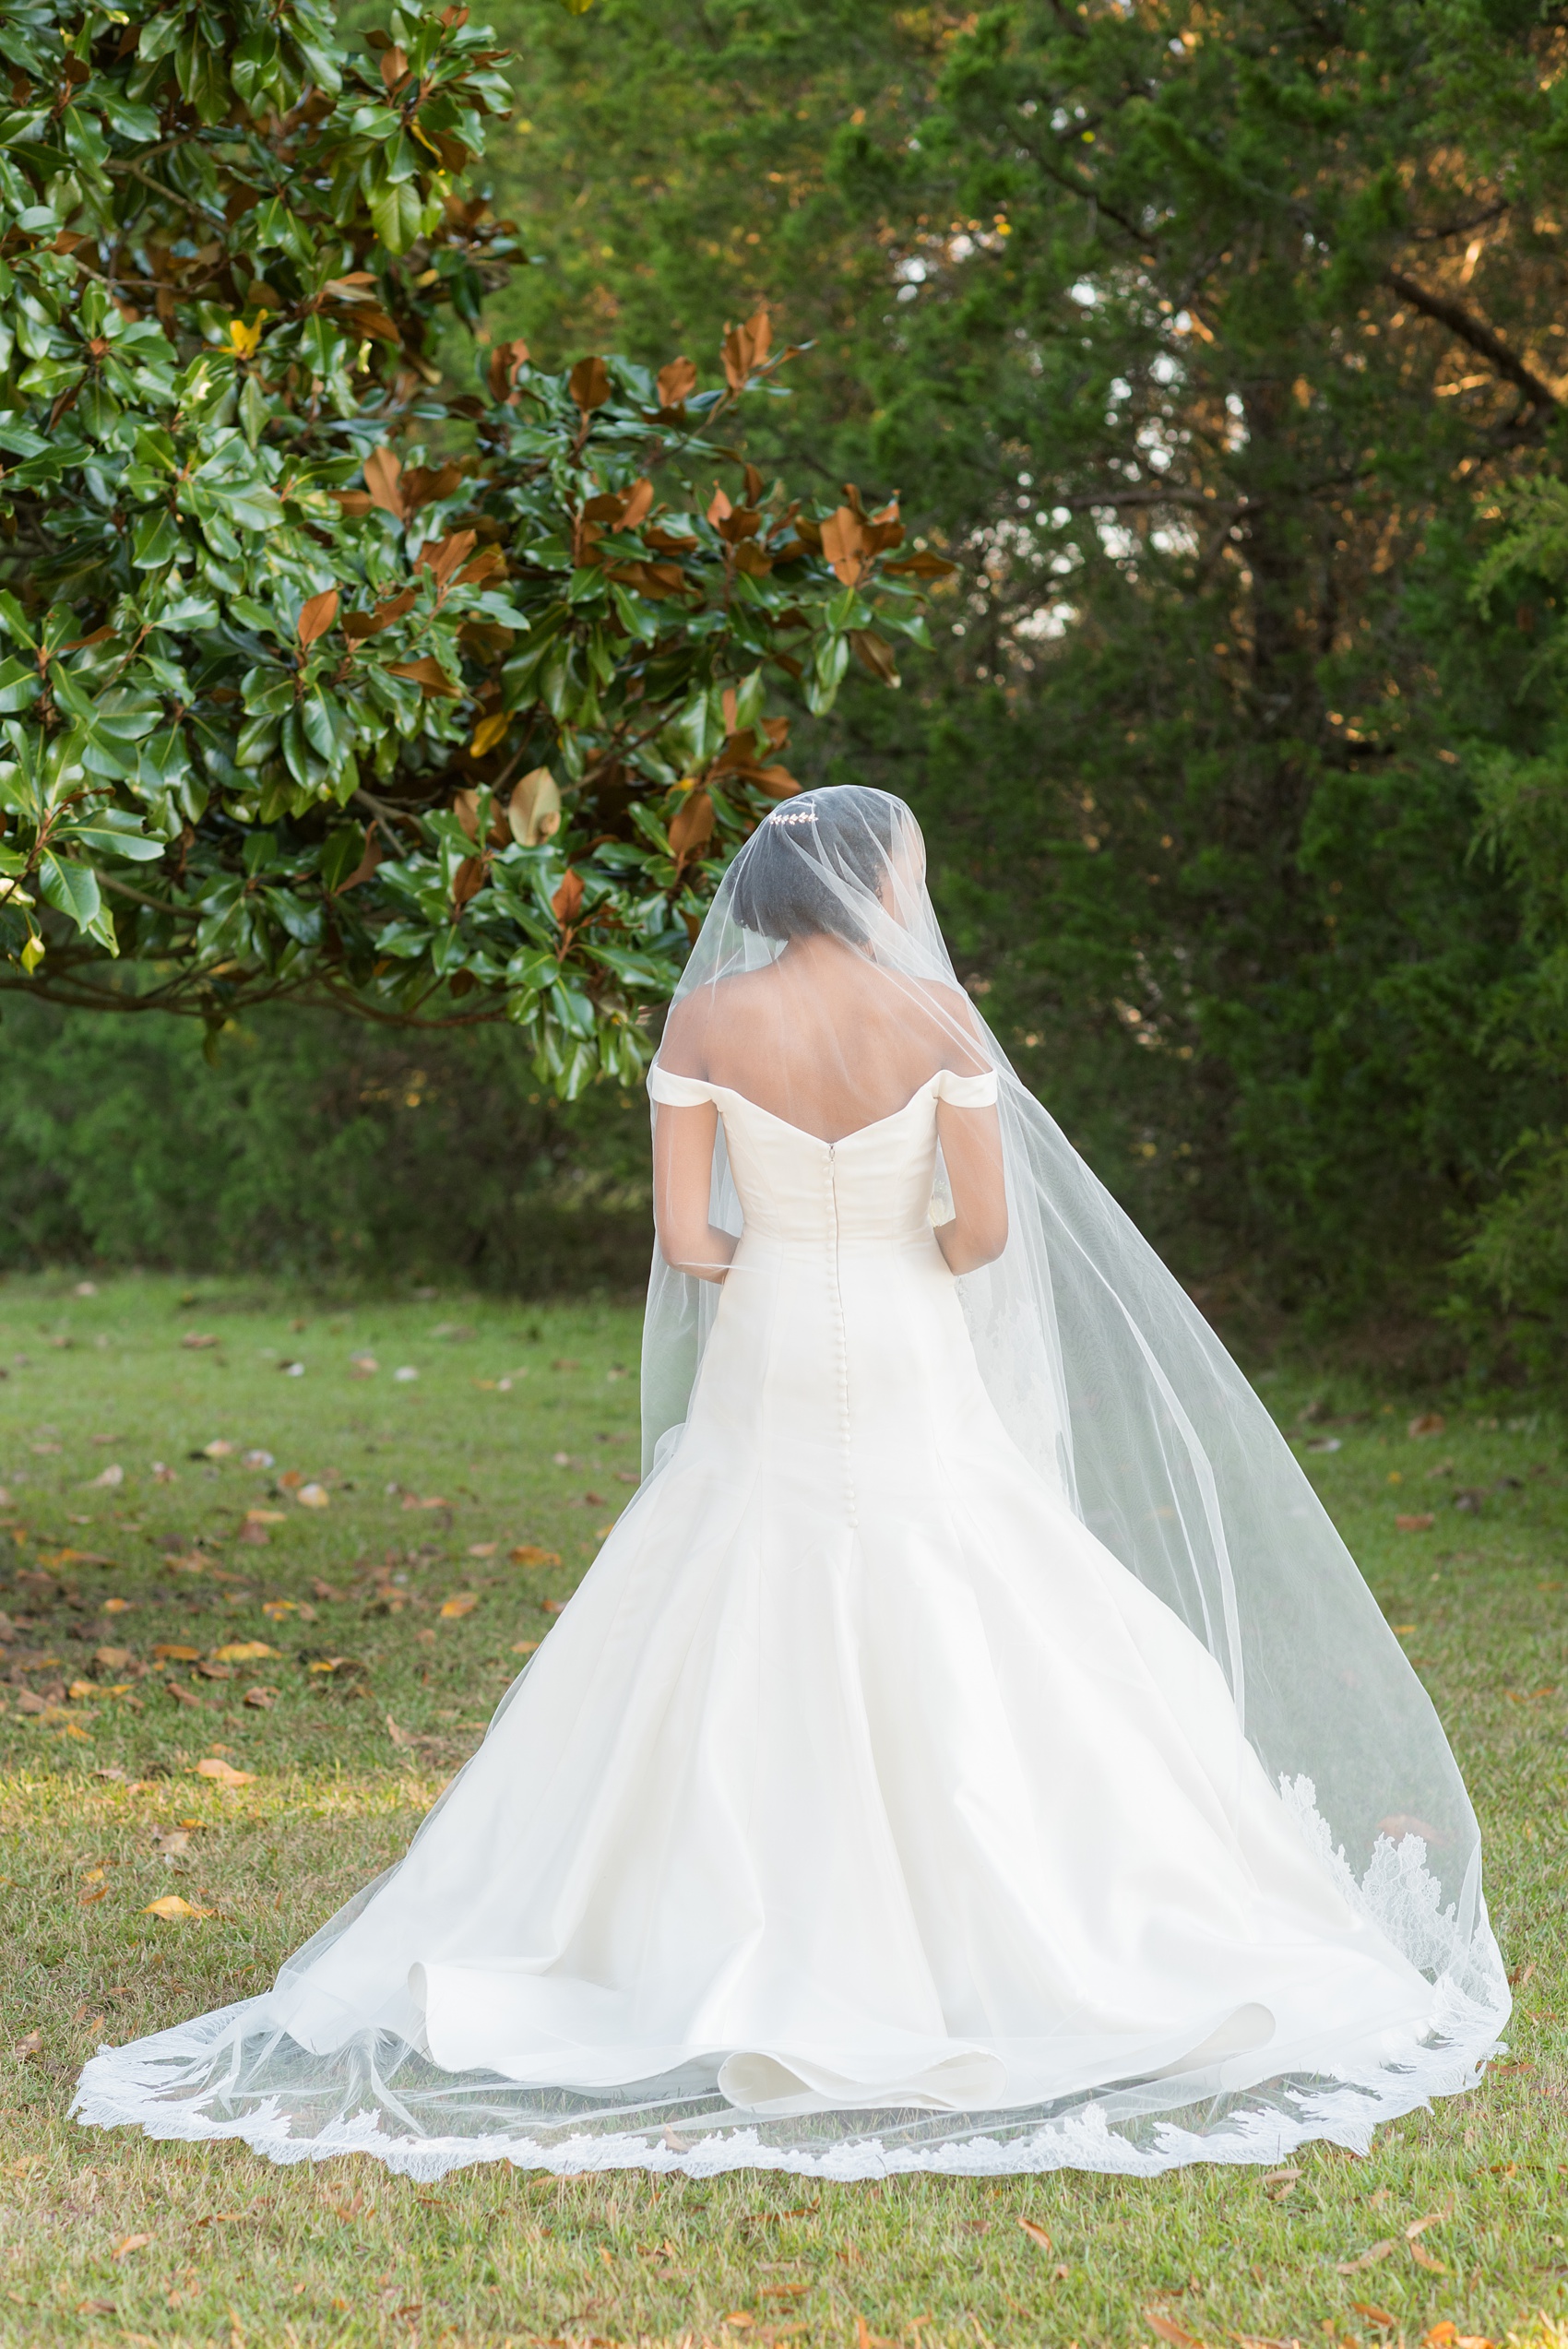 A fall wedding with burgundy, dusty rose and grey details. The bride wore an off-the-shoulder Anne Barge dress with a long veil that extended past her train. Mikkel Paige Photography, photographer in Greenville NC and Raleigh captured this wedding at Rock Springs Center, planned by @vivalevent. Click through for more details and pictures from this autumn day! #mikkelpaige #northcarolinawedding #southernwedding #burgundywedding #offtheshouldergown #annebarge #offtheshoulder #bridestyle